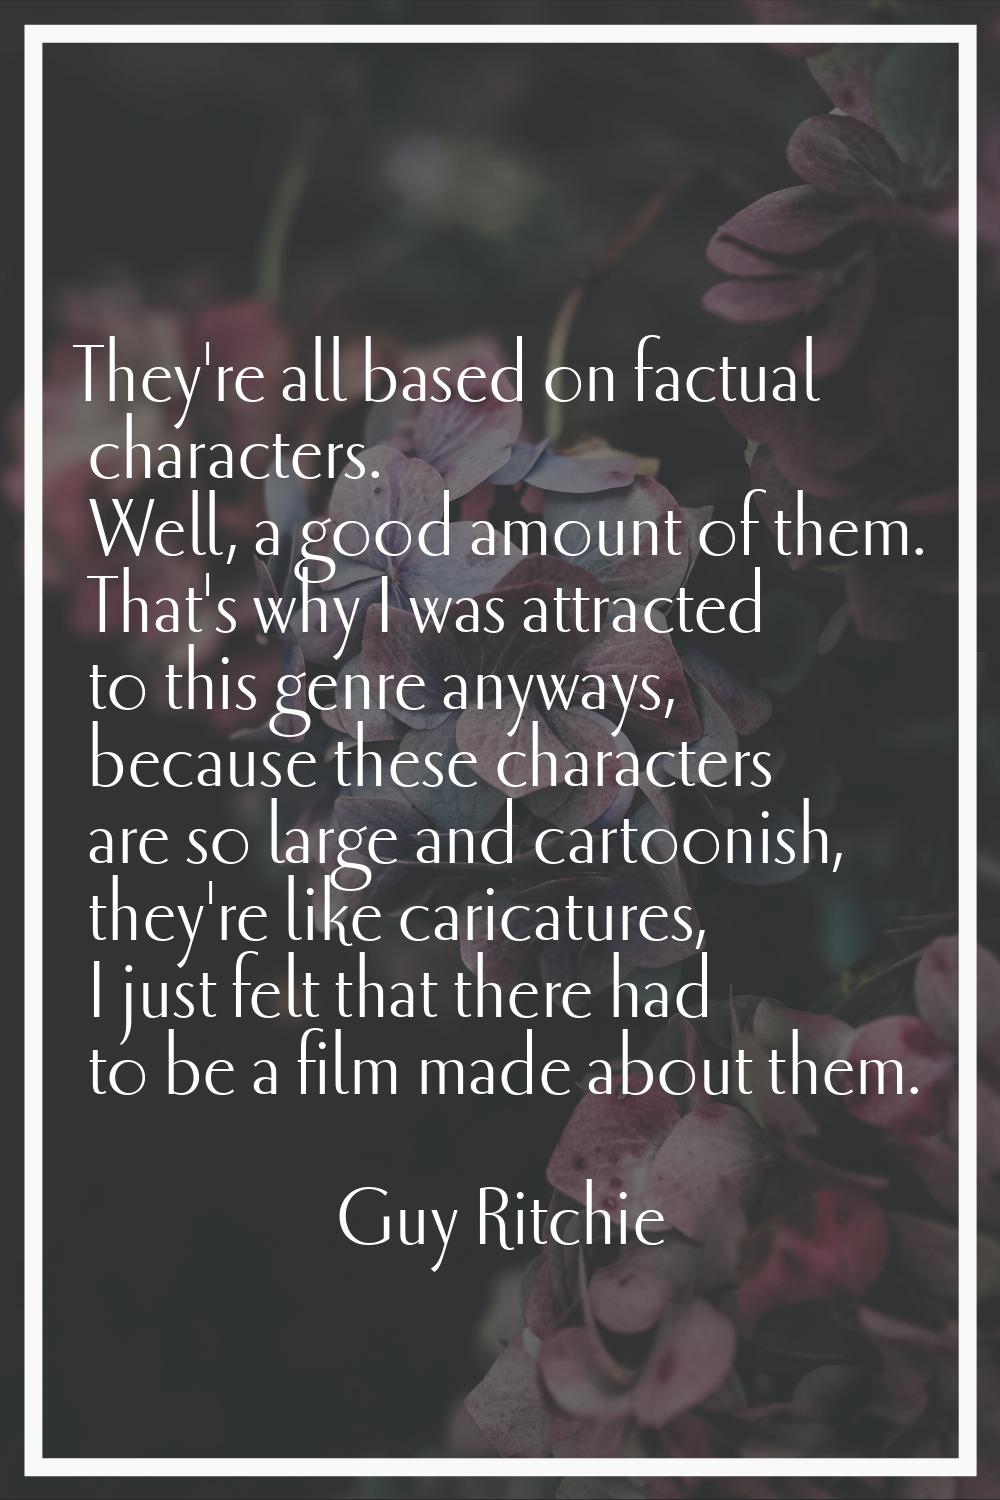 They're all based on factual characters. Well, a good amount of them. That's why I was attracted to